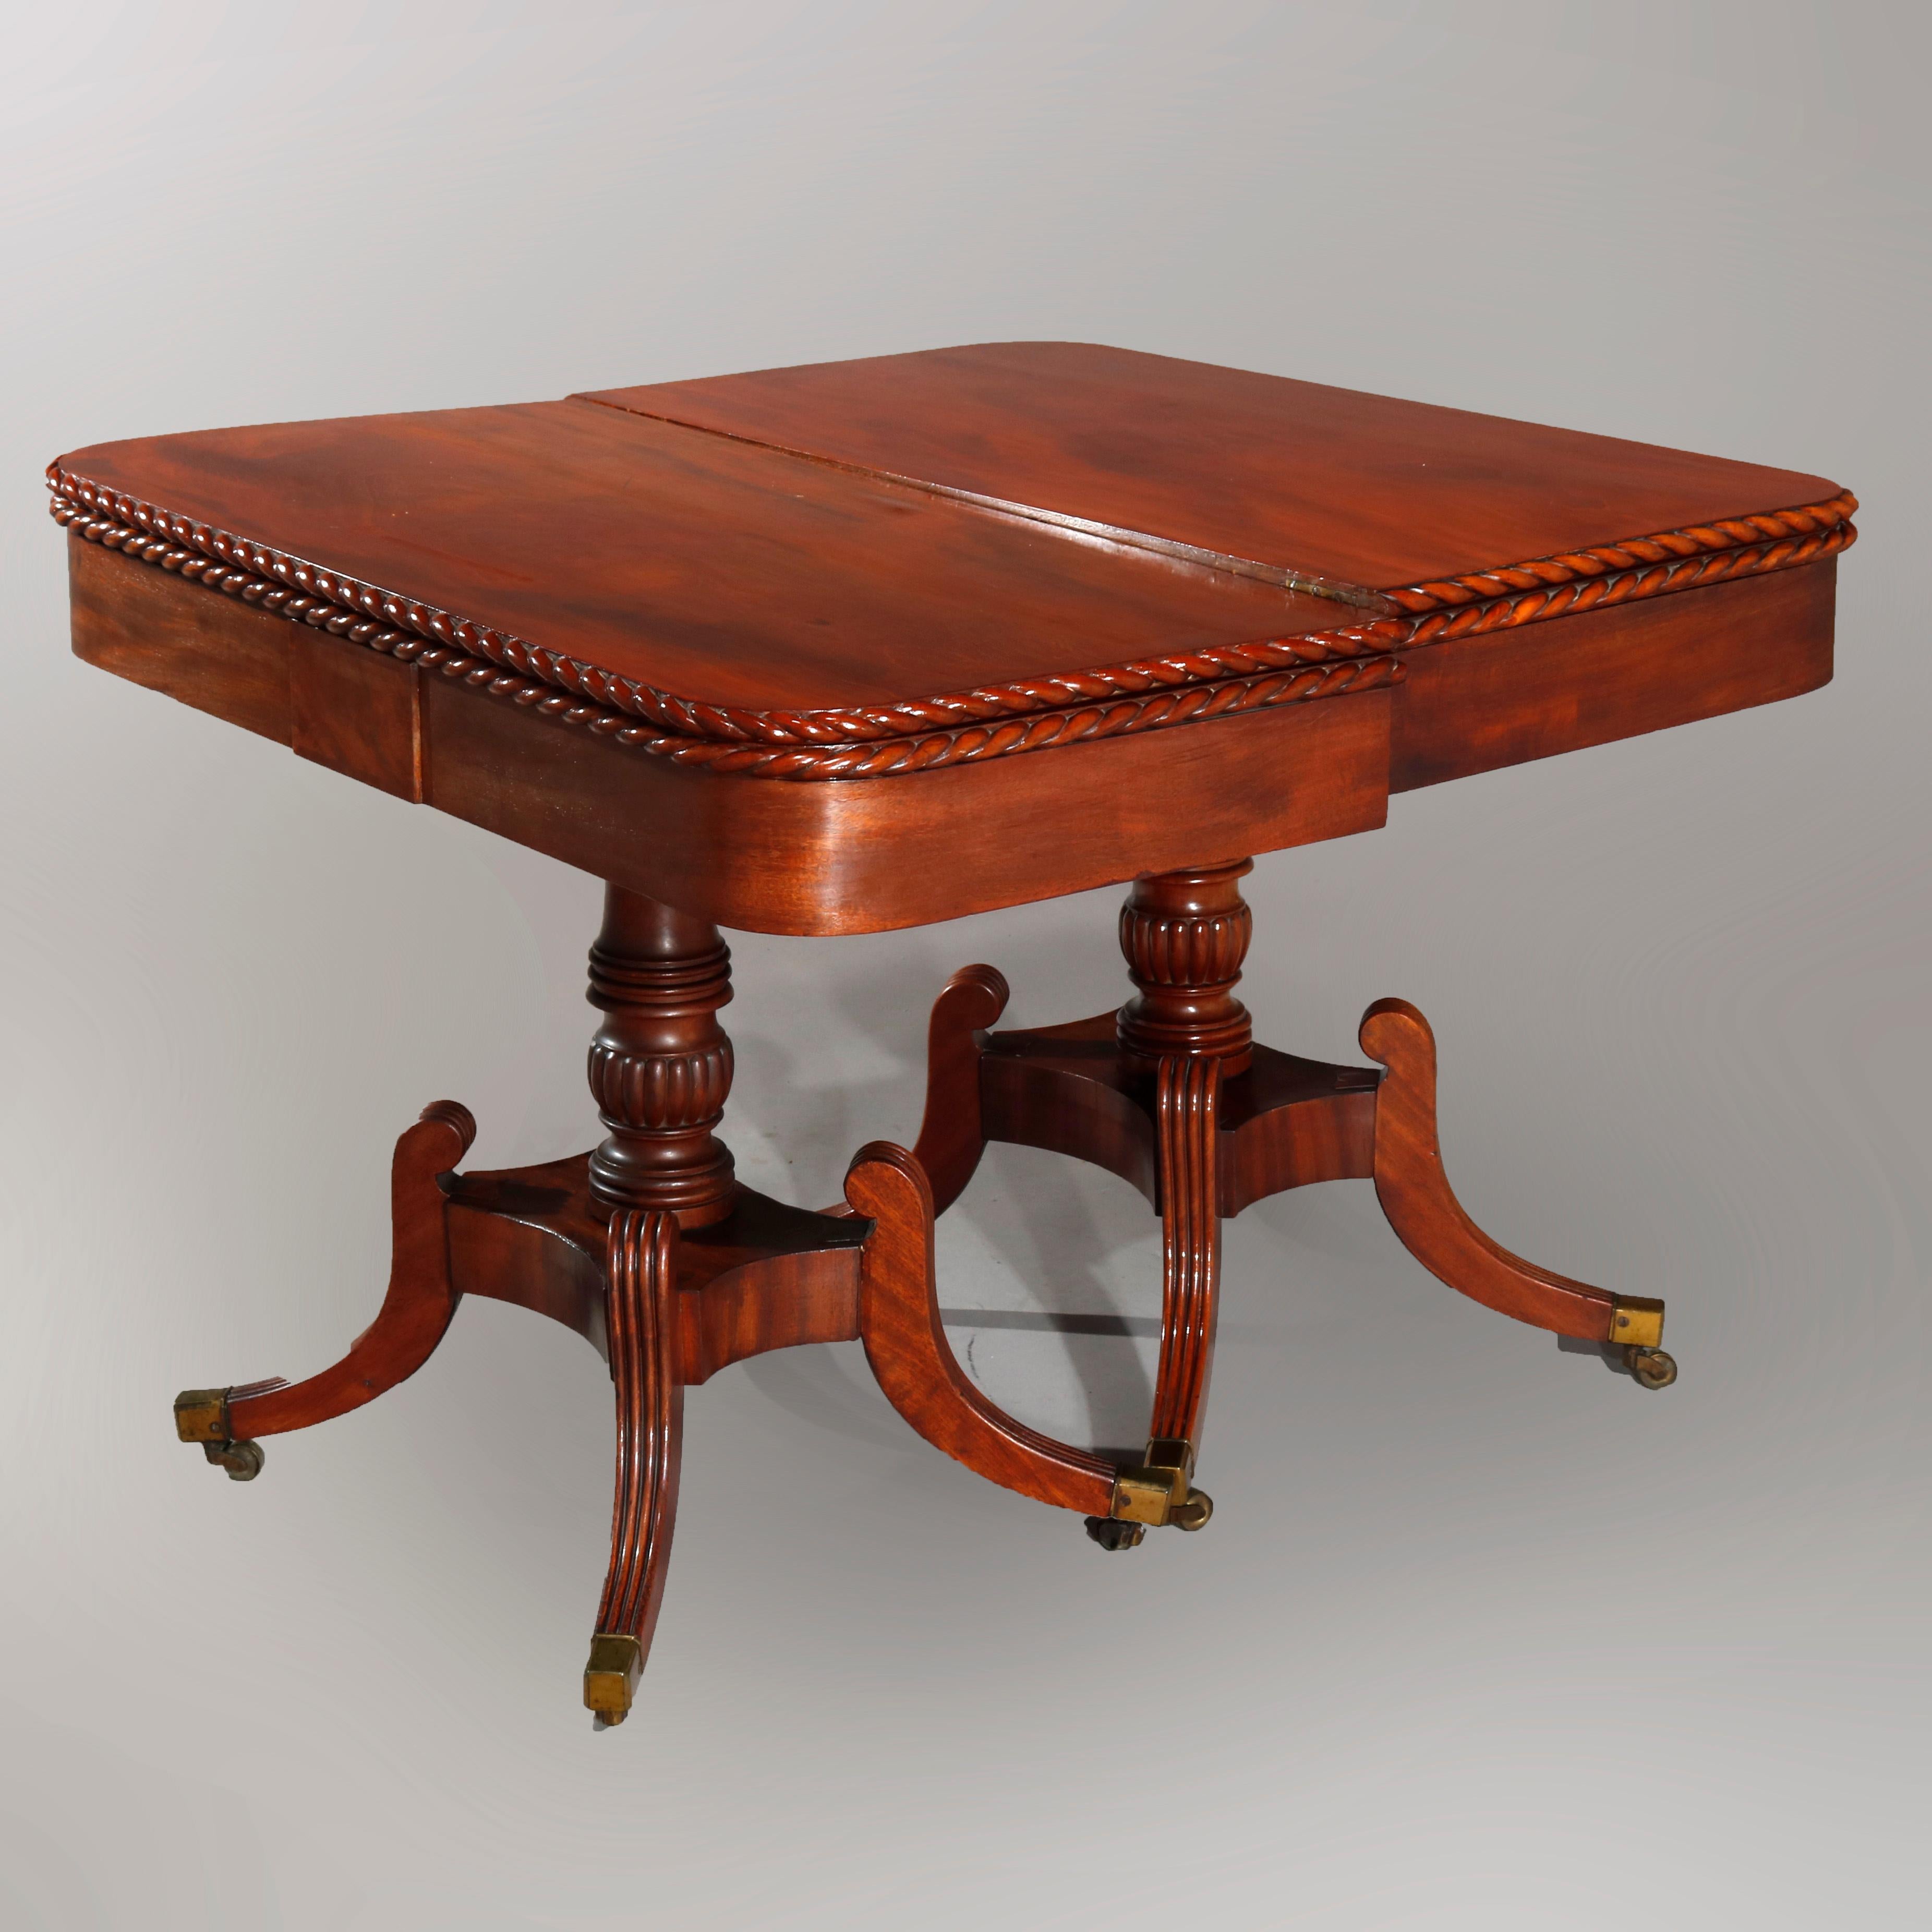 Carved Pair of Federal Flamed Mahogany Game Tables W. Gadrooned Edge, circa 1820